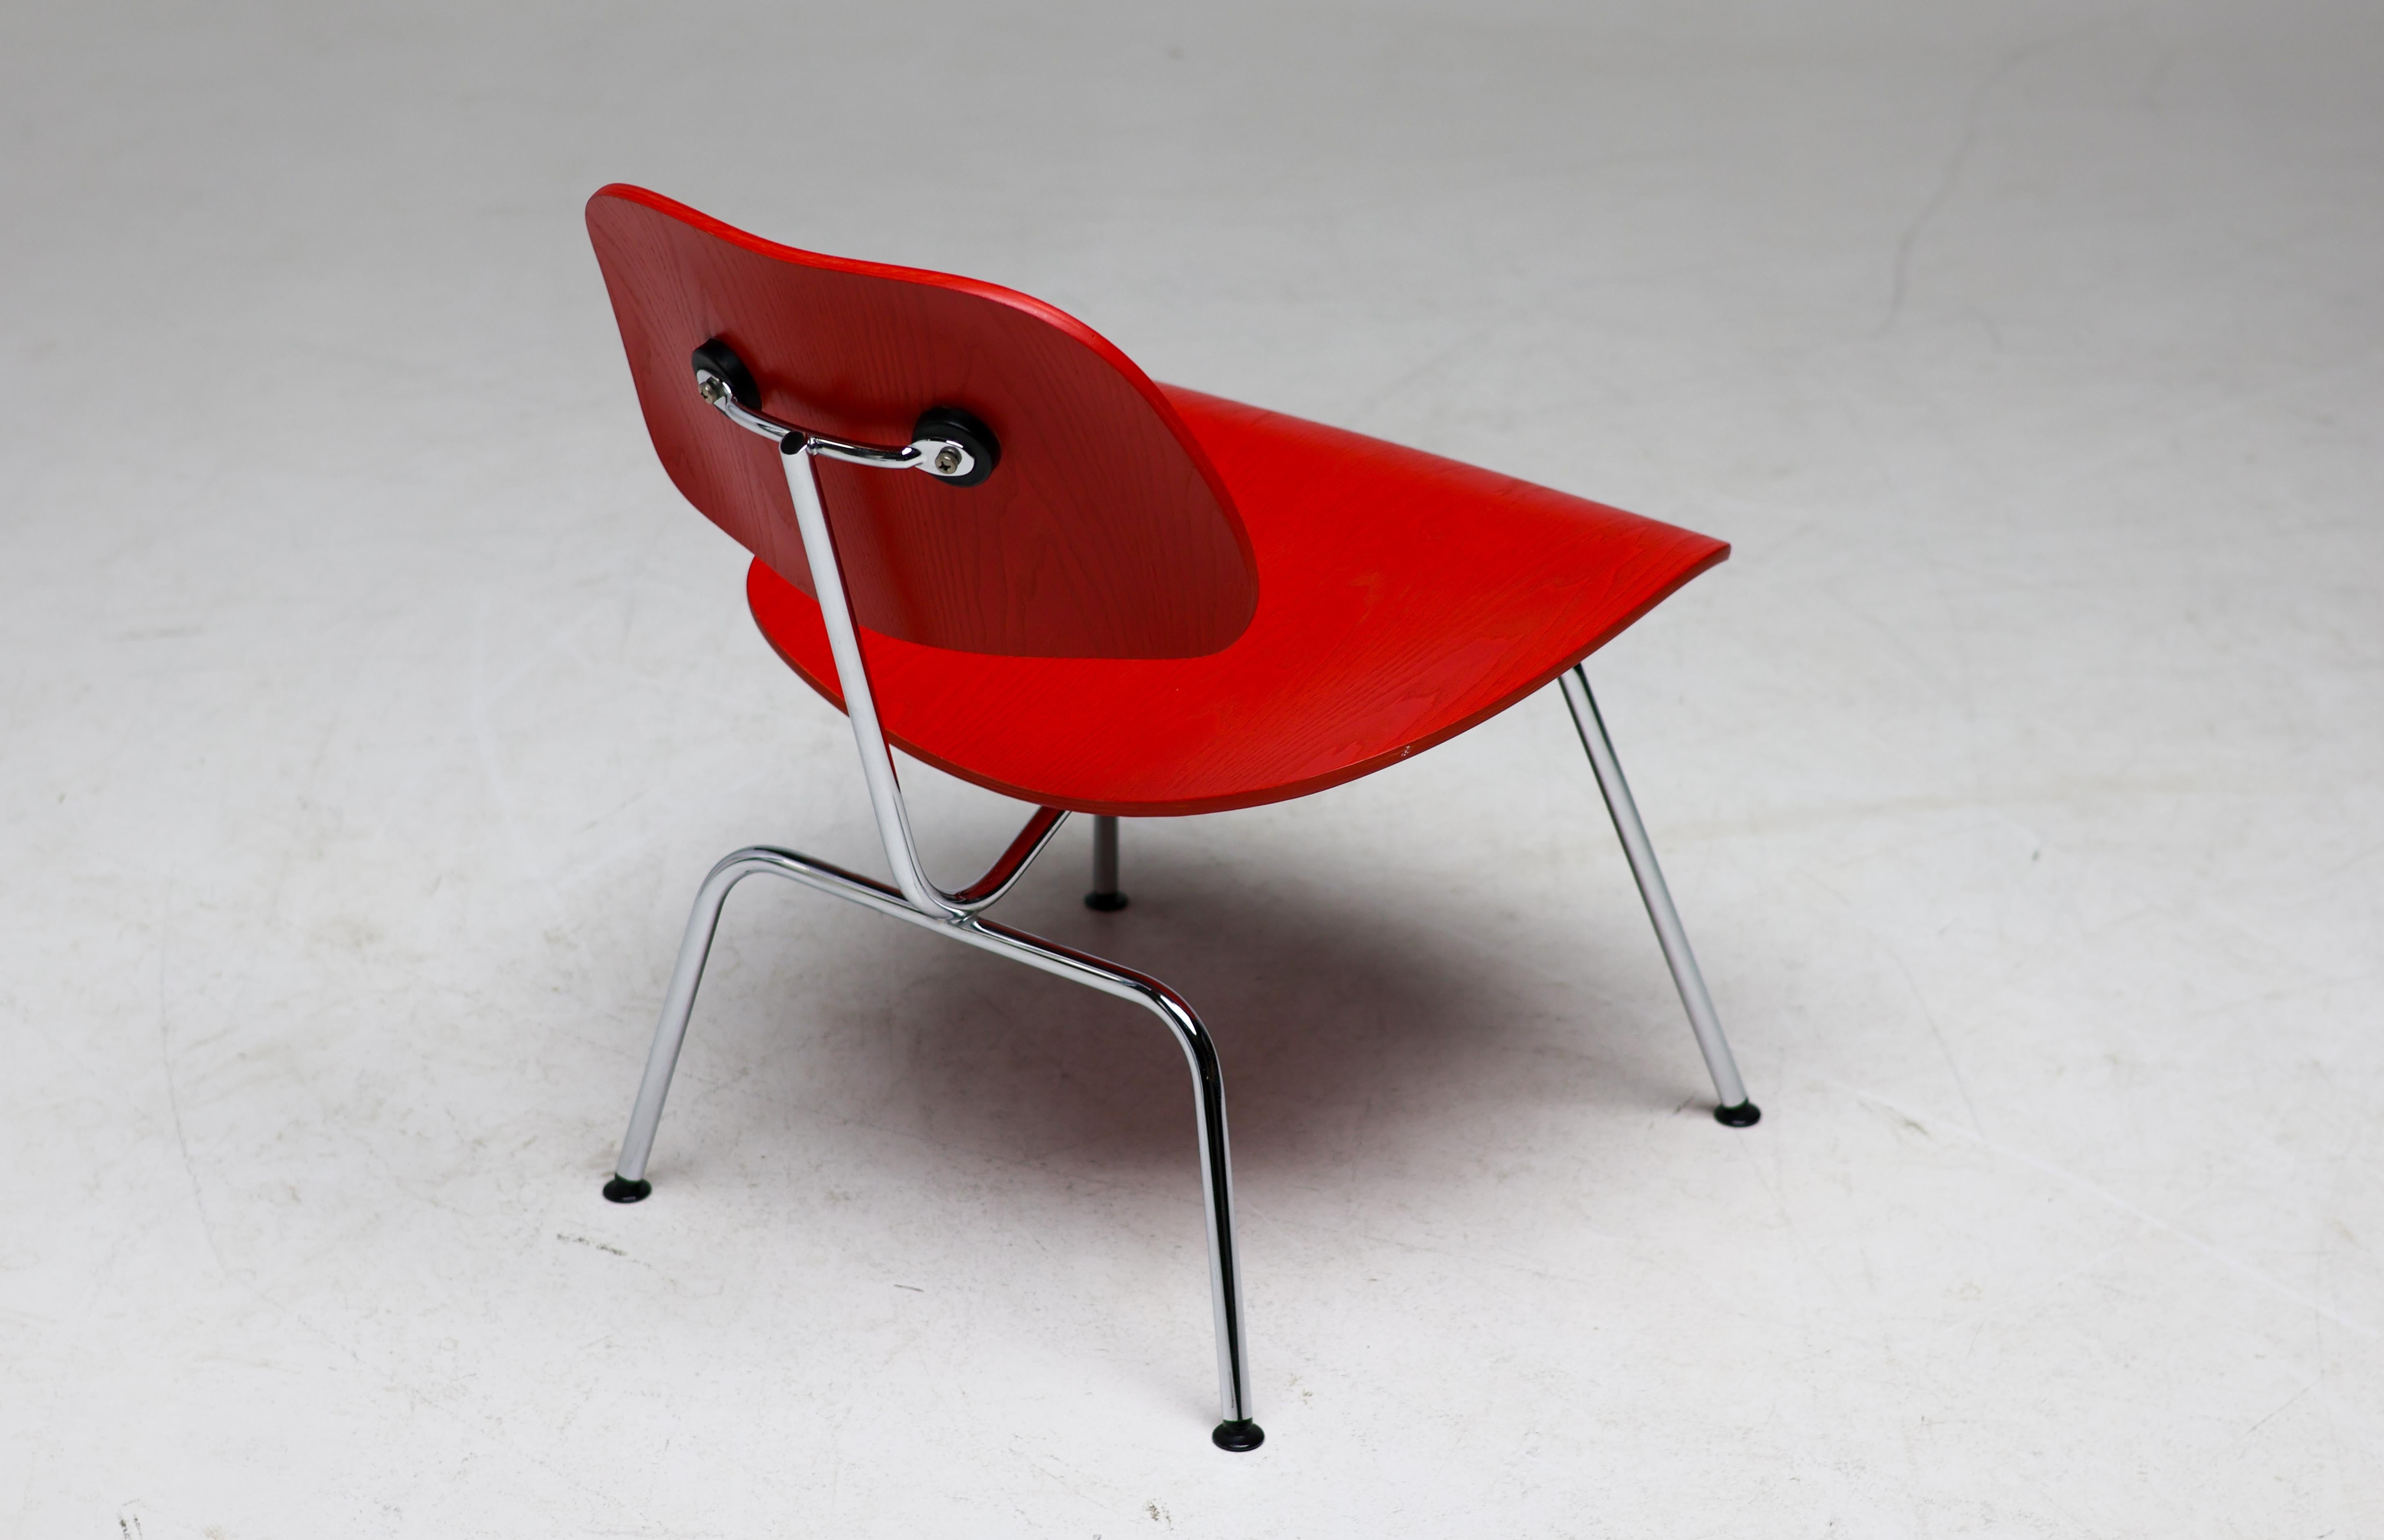 Lounge chair designed by Charles and Ray Eames for Vitra, 1998.  Marked with label.
Rare bright red version that was only produced during a limited period from 1998 to 2006.

The Vitra LCM Chair, designed by Charles and Ray Eames, is the result of